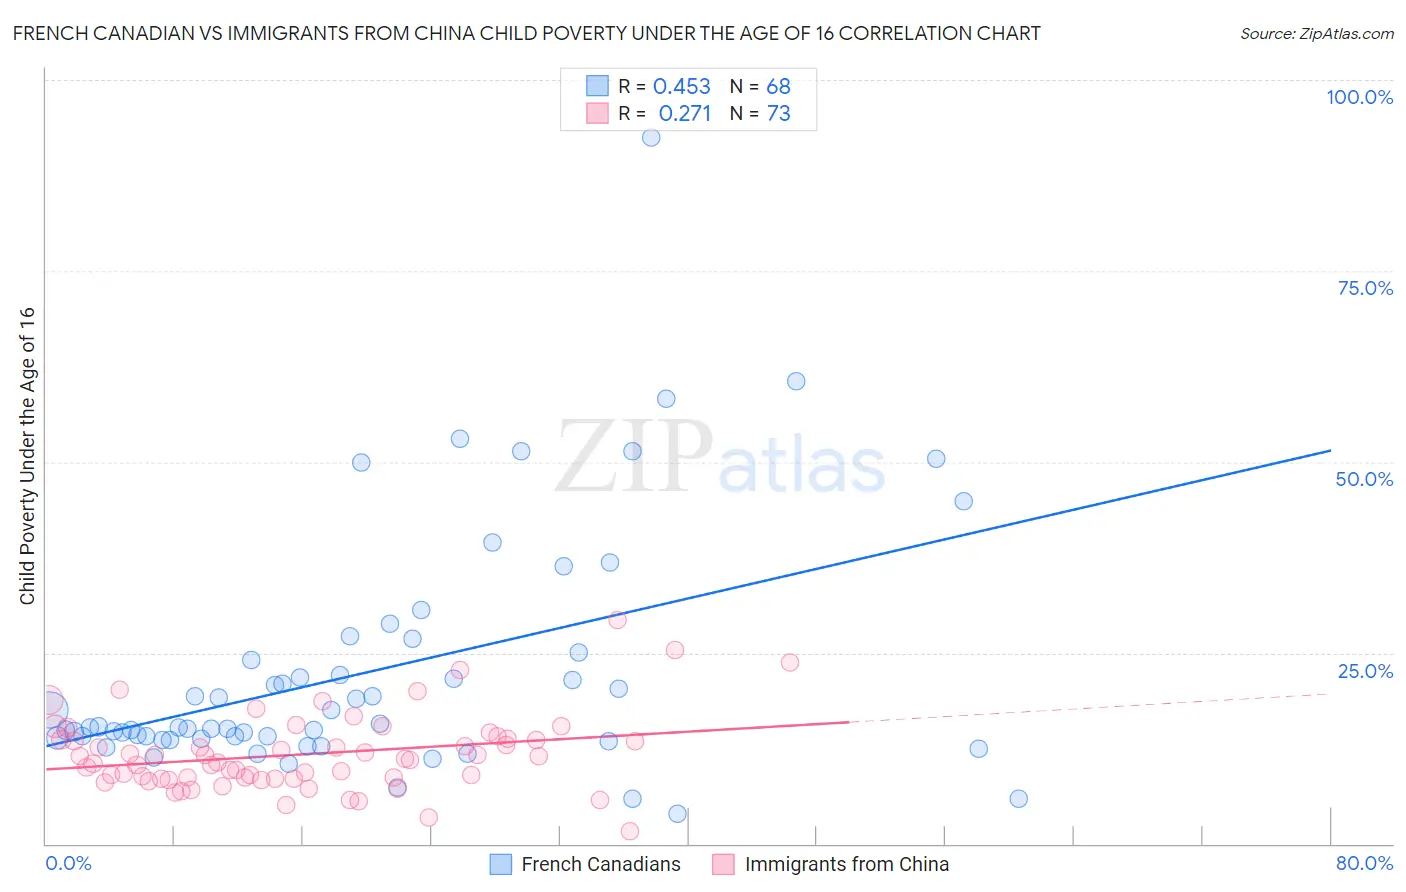 French Canadian vs Immigrants from China Child Poverty Under the Age of 16